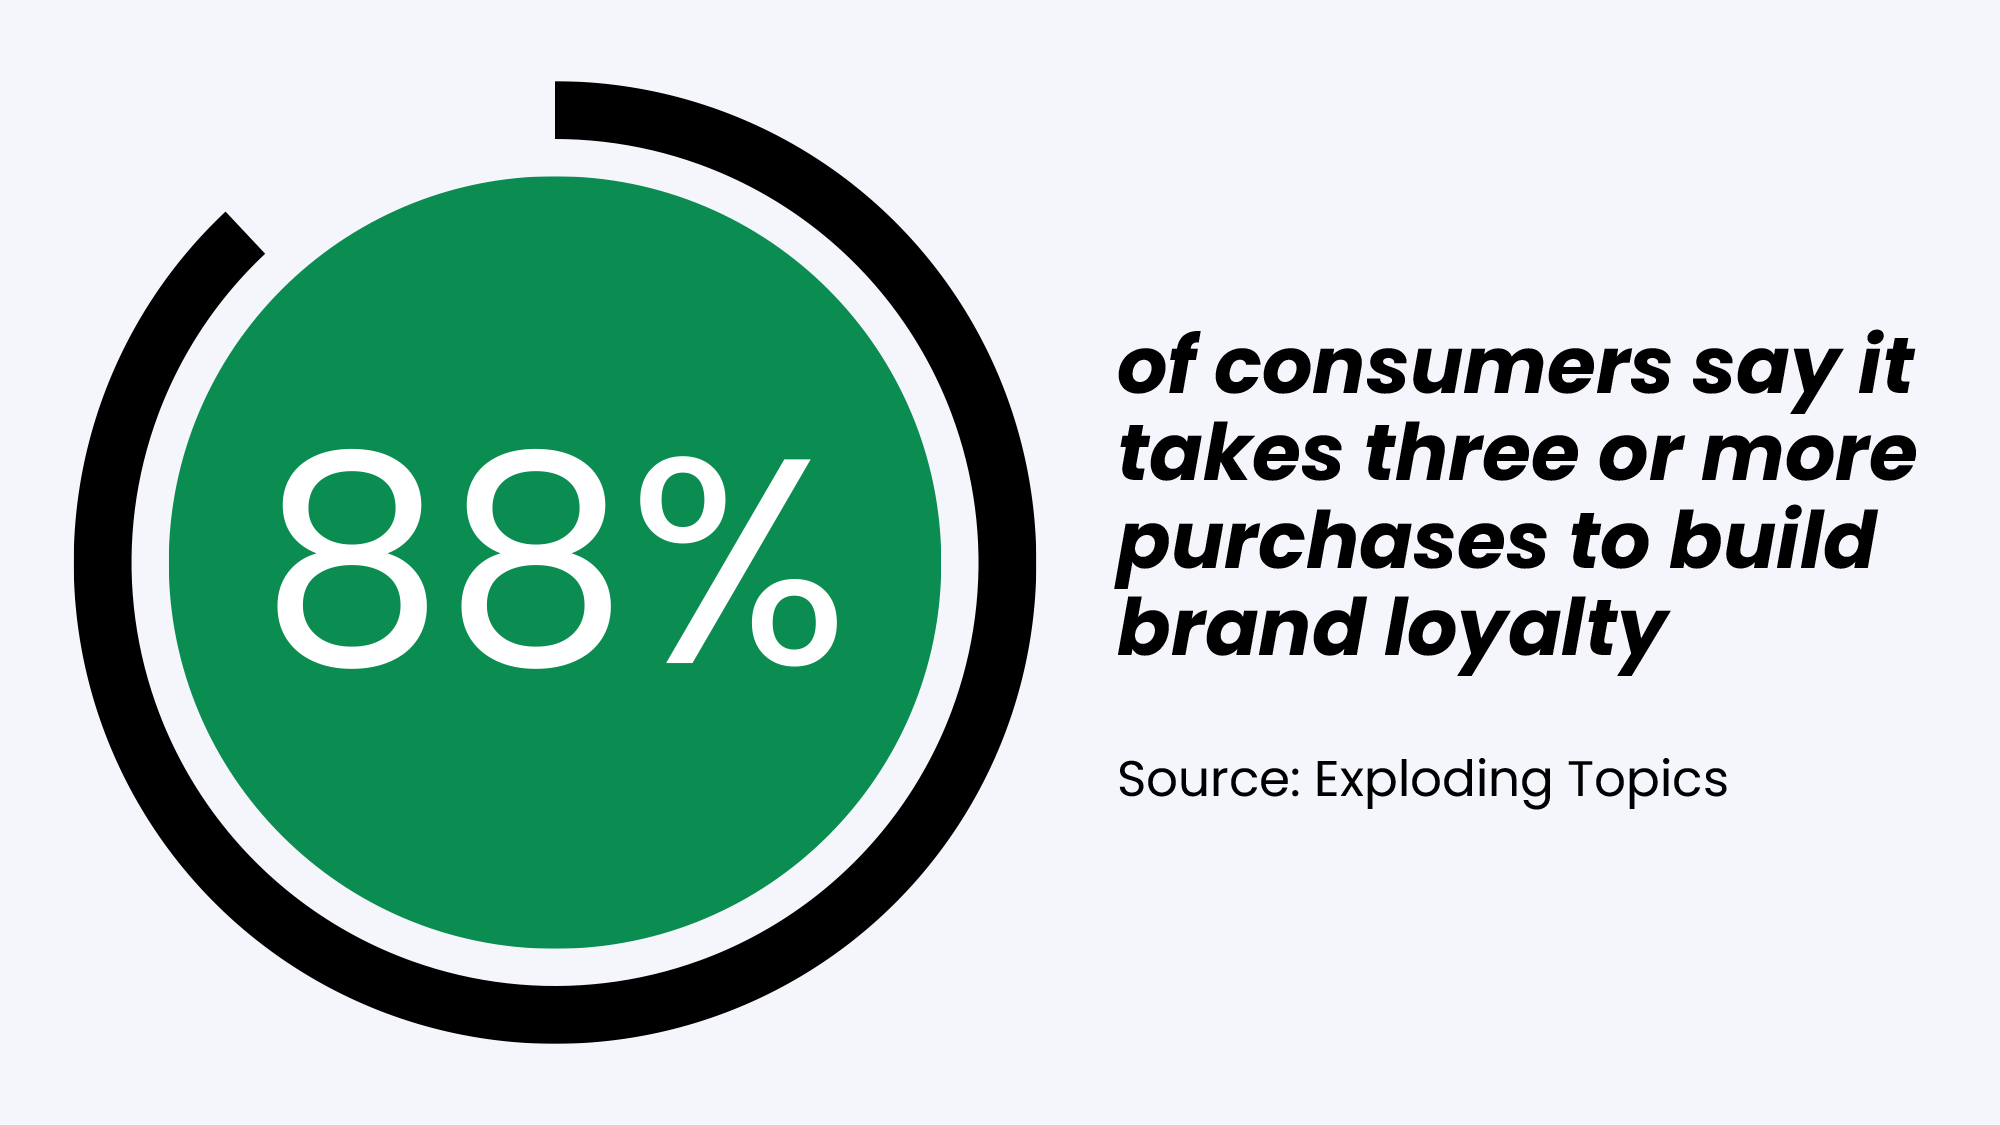 of consumers say it takes three or more purchases to build brand loyalty